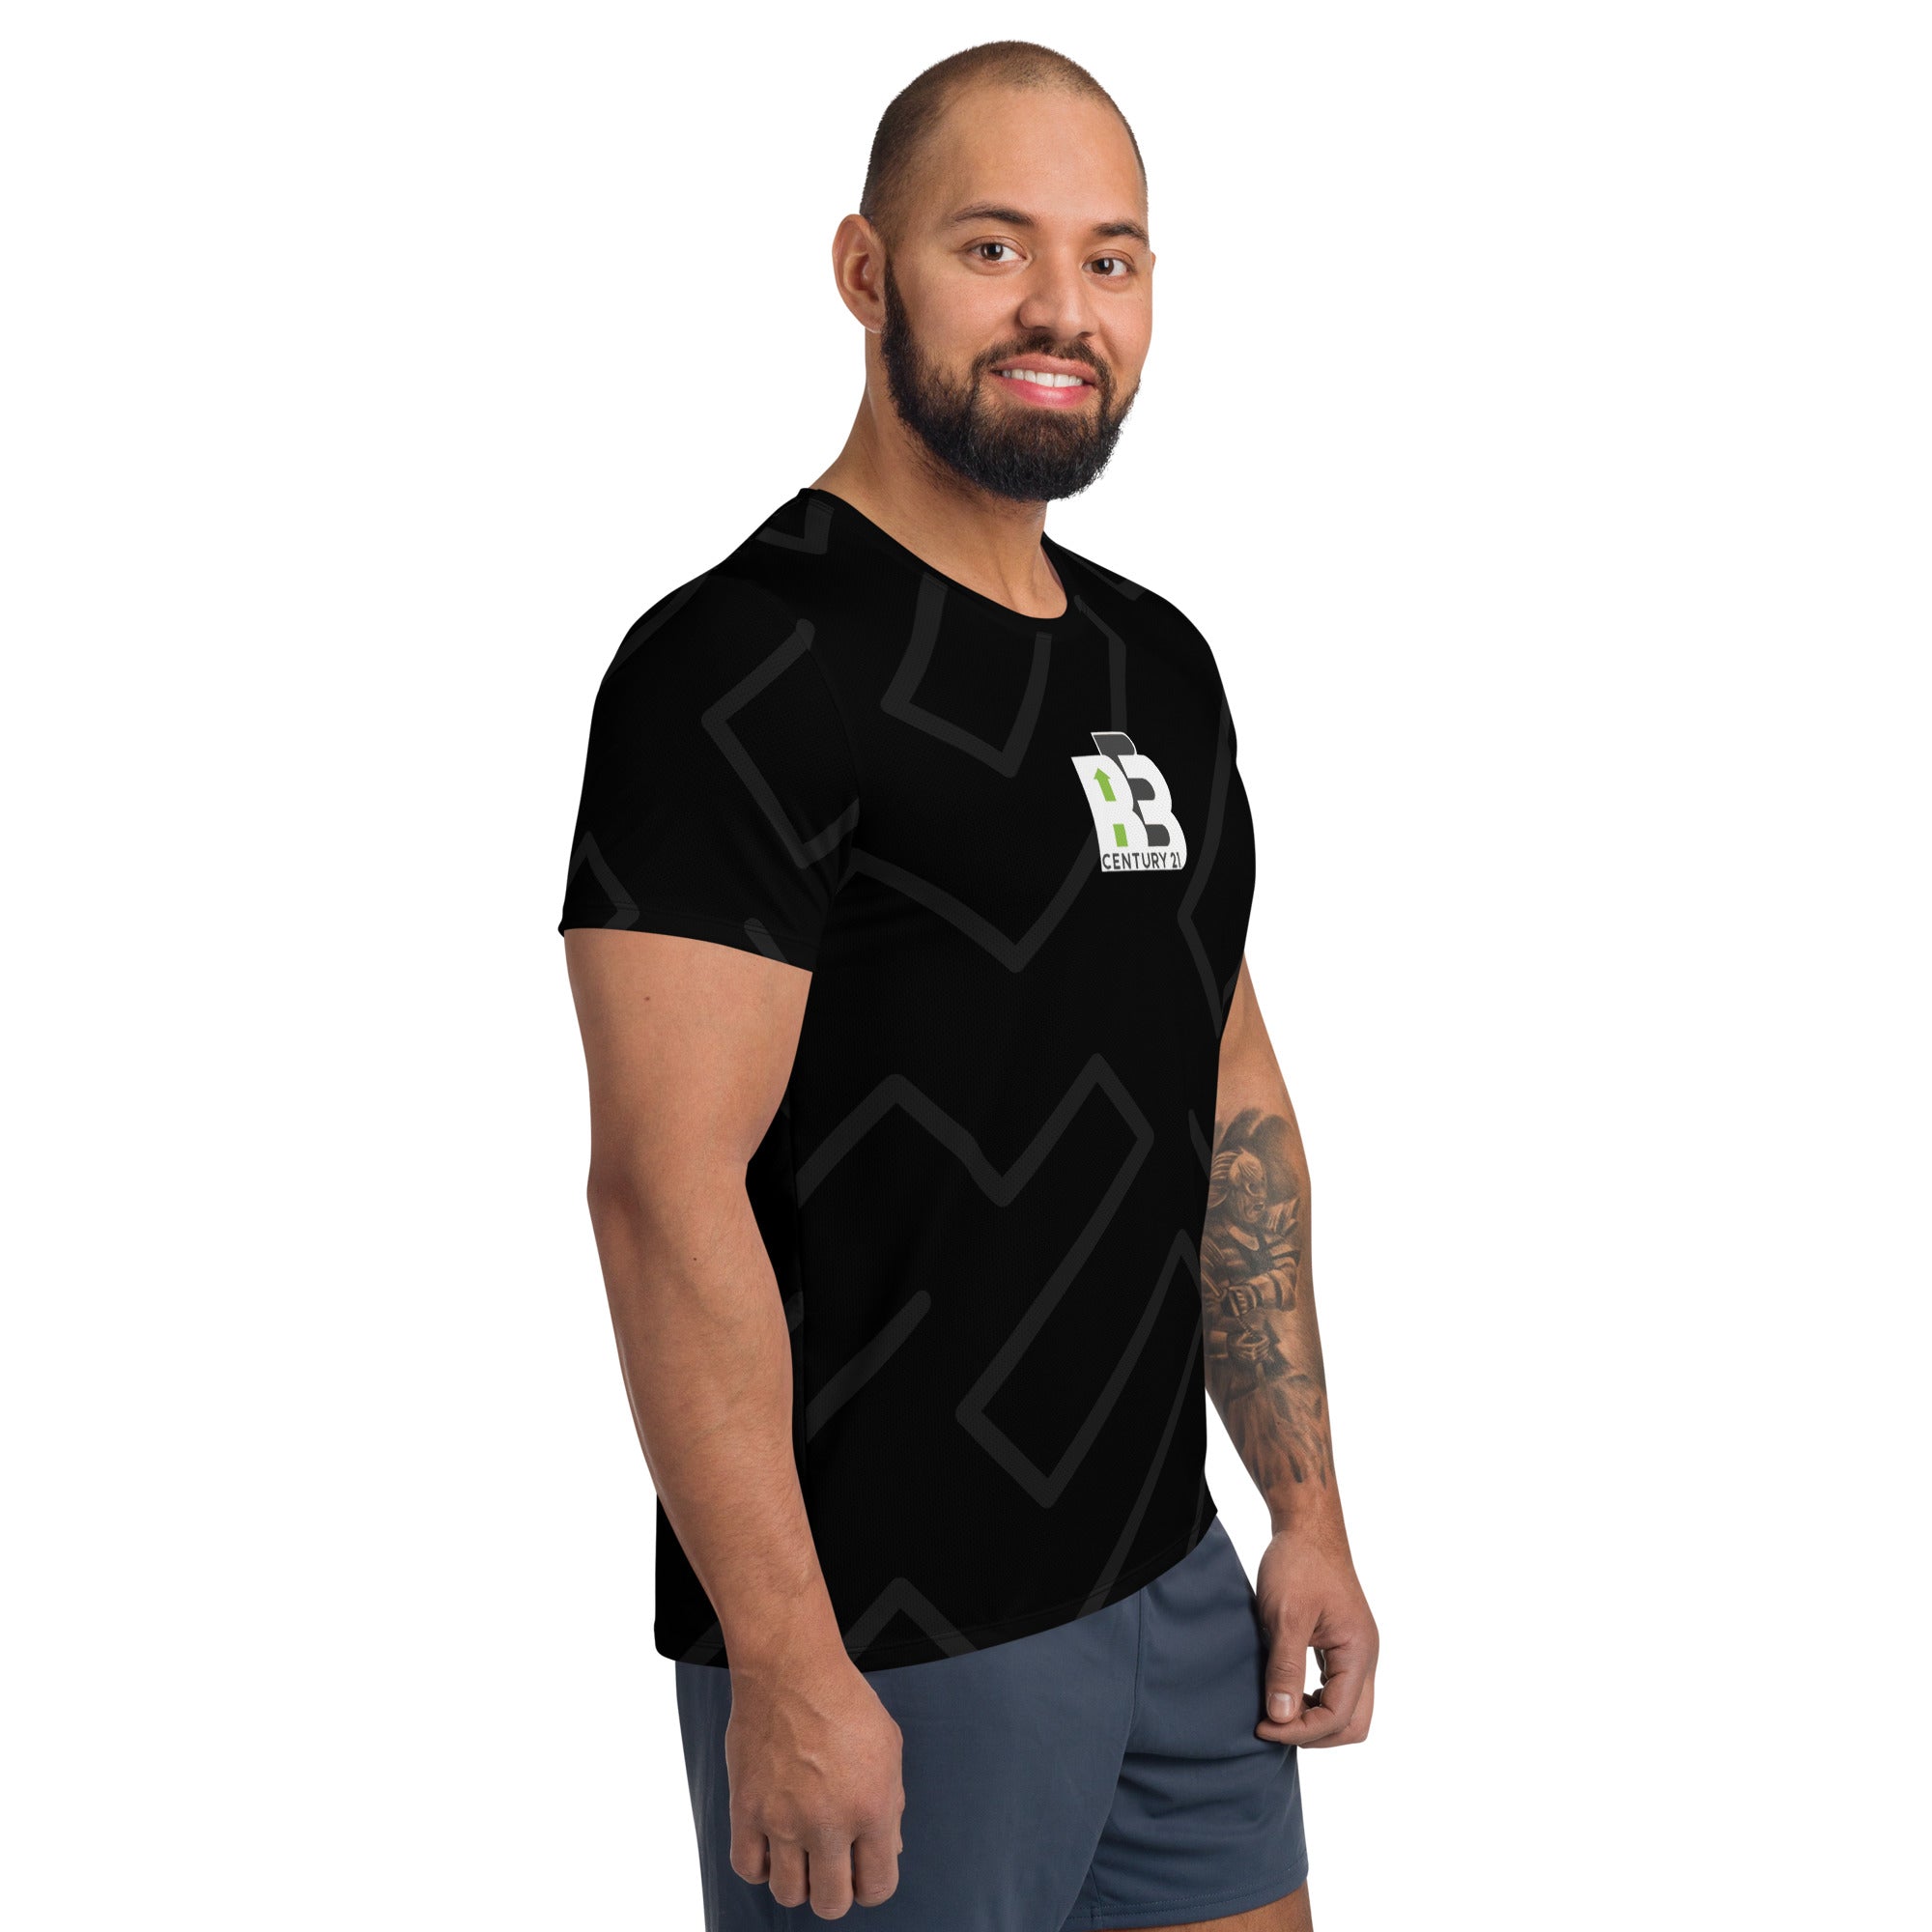 BE3 Geo All-Over Print Men's Athletic T-shirt